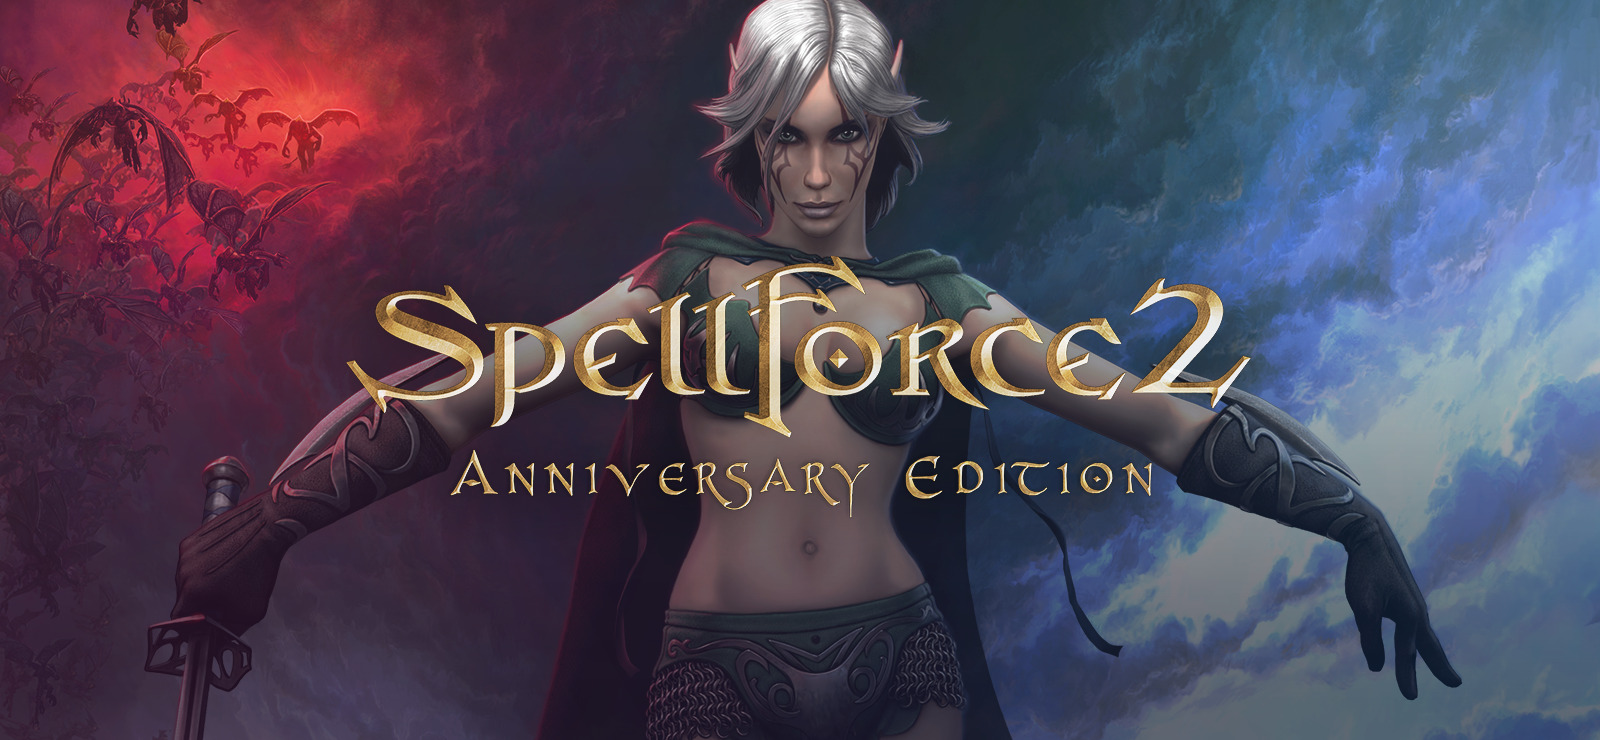 download free spellforce faith in destiny